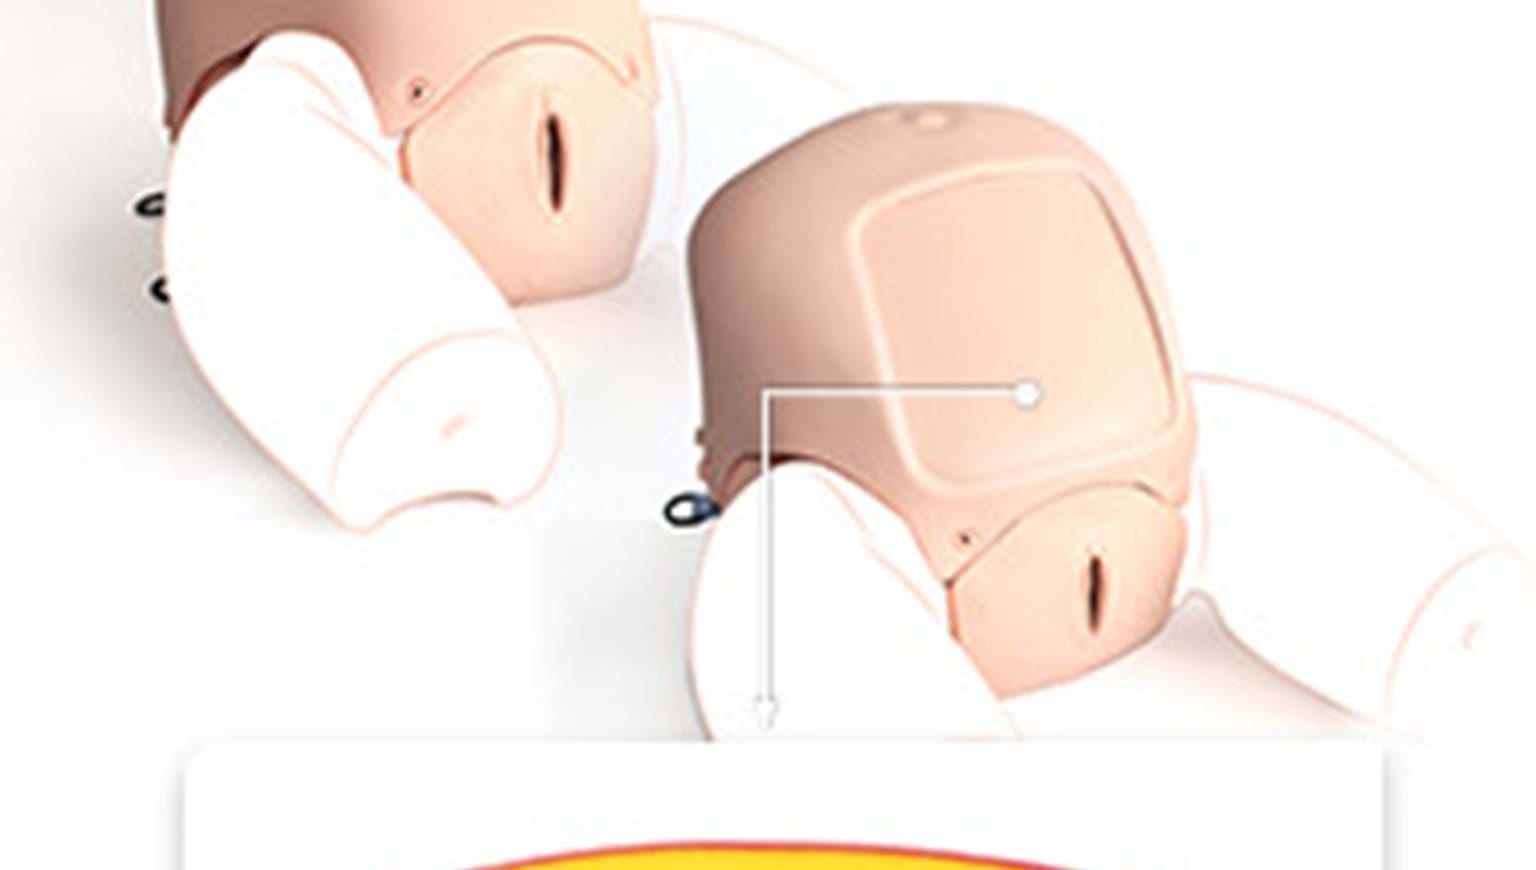 C-Section Module added to the PROMPT Flex Range